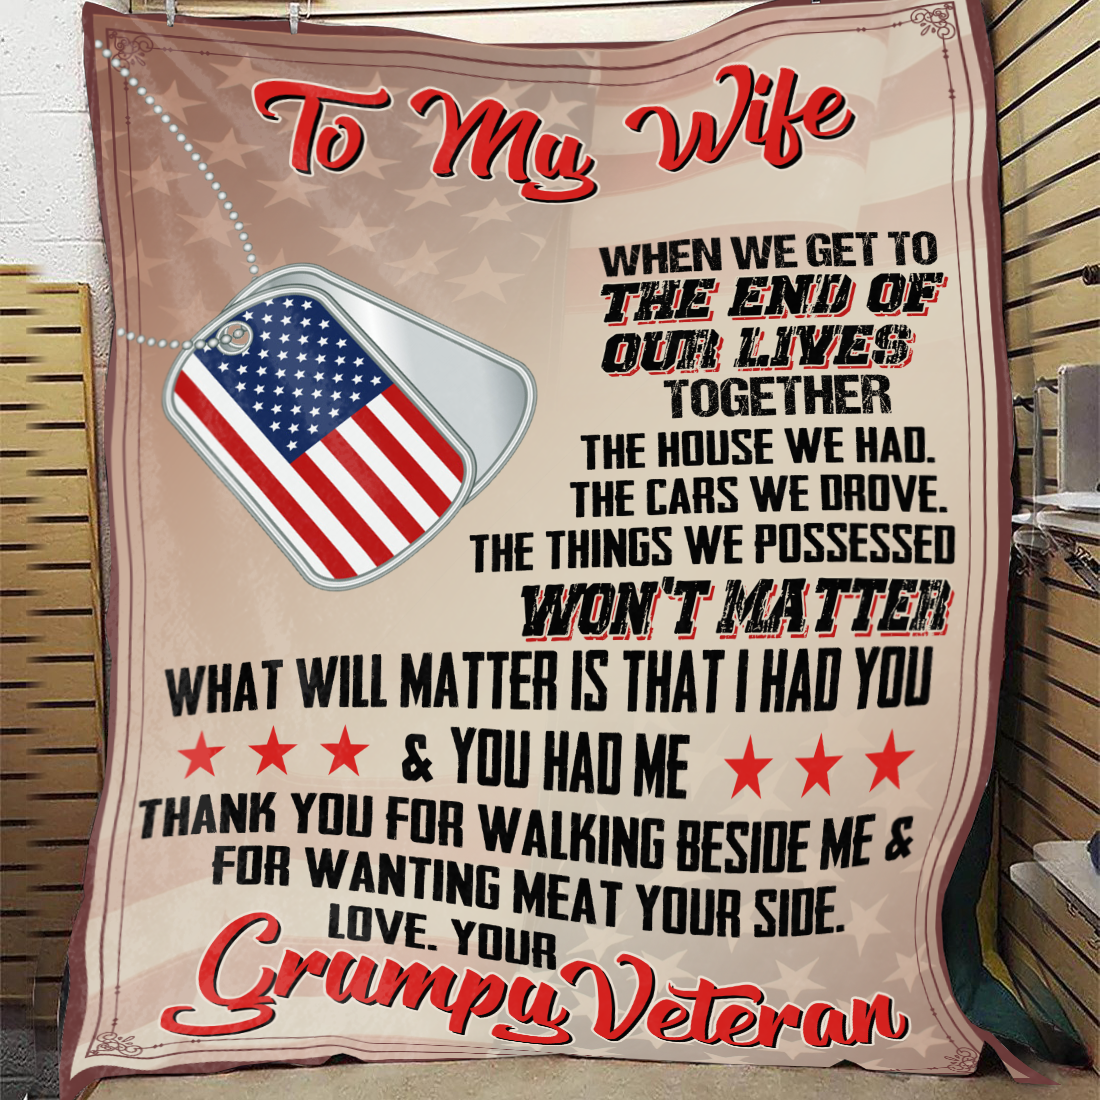 To My Wife What Matter is That I Had You and You Had Me Blanket